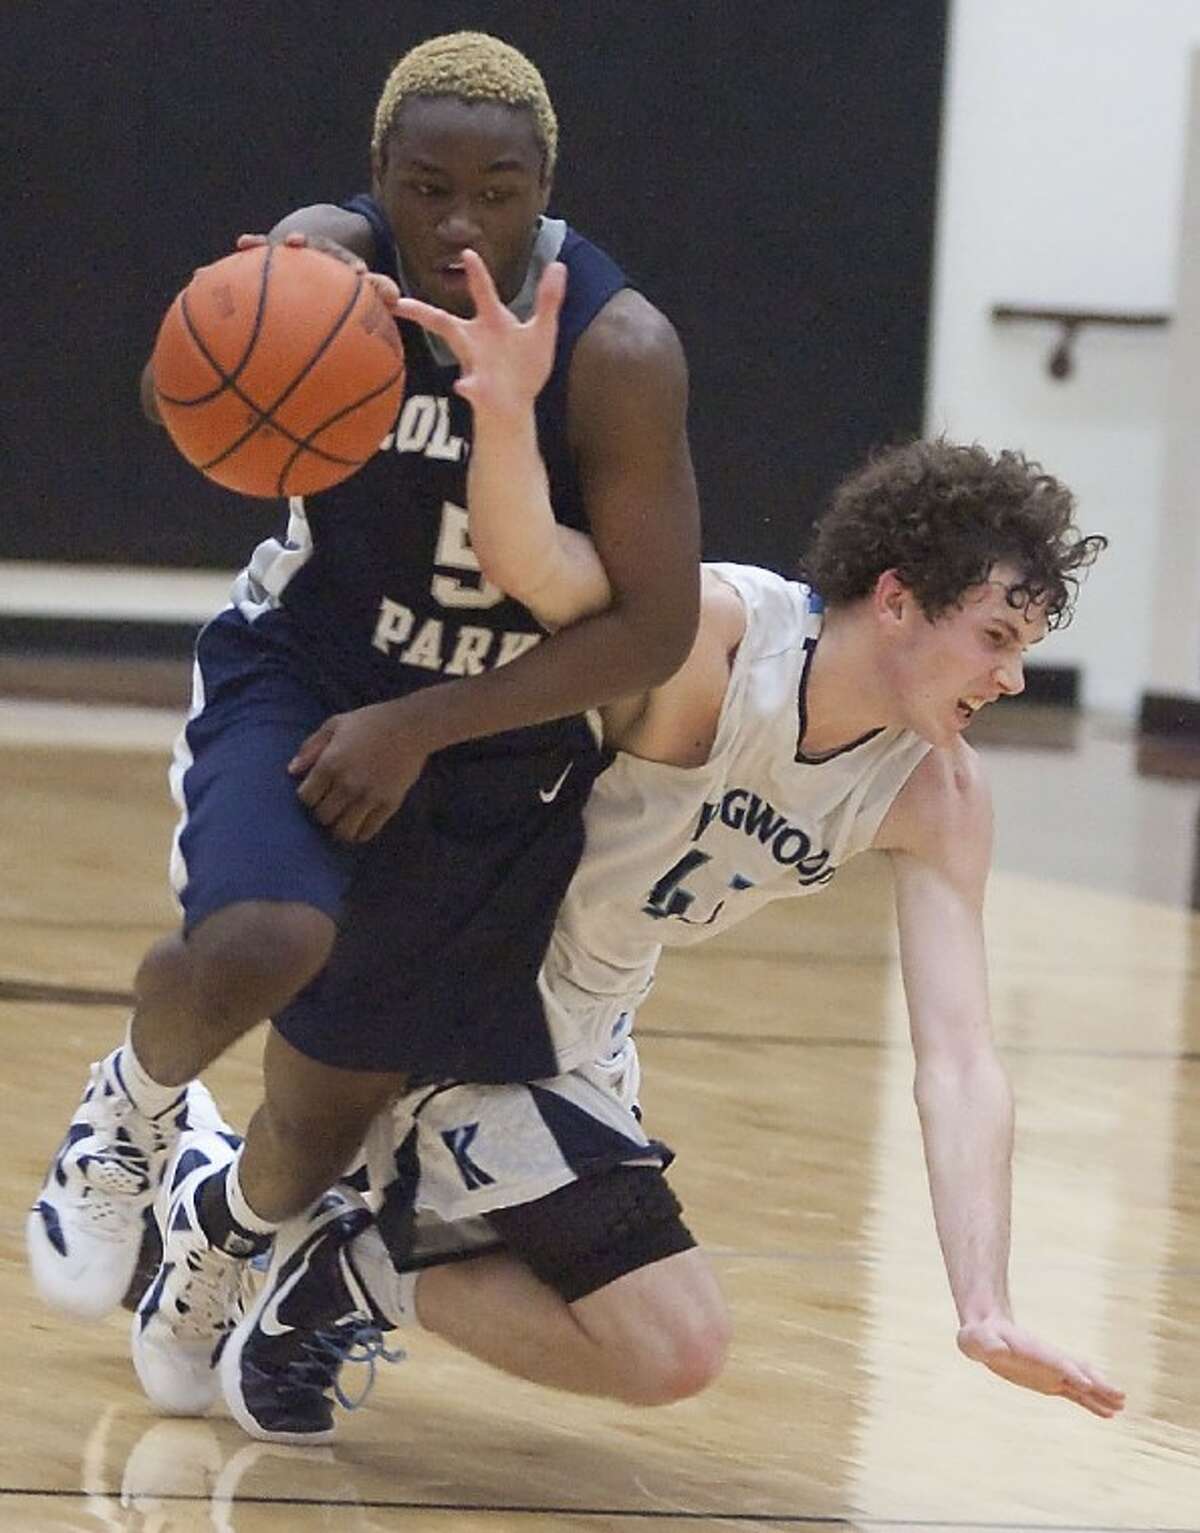 College Park's Desmond Fleming trips over Kingwood's Kyle Phillips Tuesday at Porter High School. See more photos online at www.yourhoustonnews.mycapture.com.